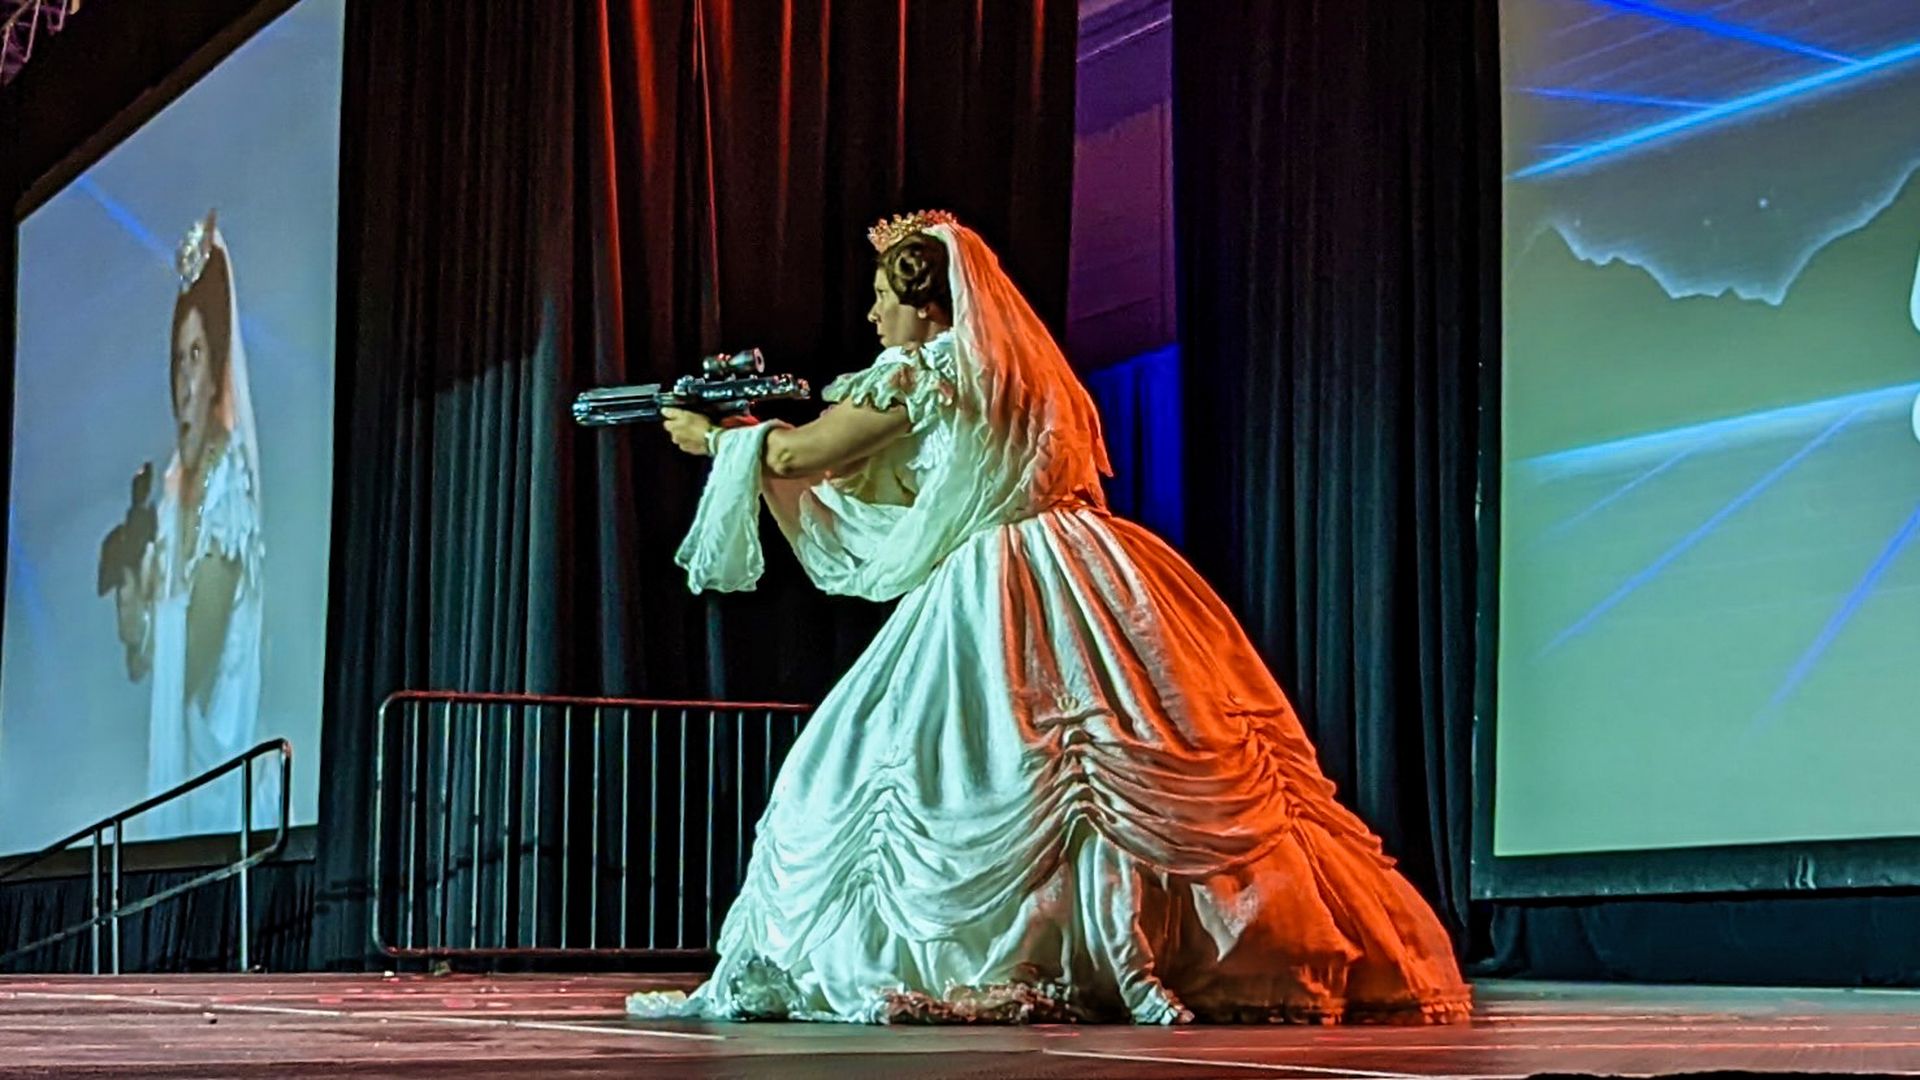 A woman is firing a blaster gun costumed as Princess Leia but with Victorian fashion stylings.